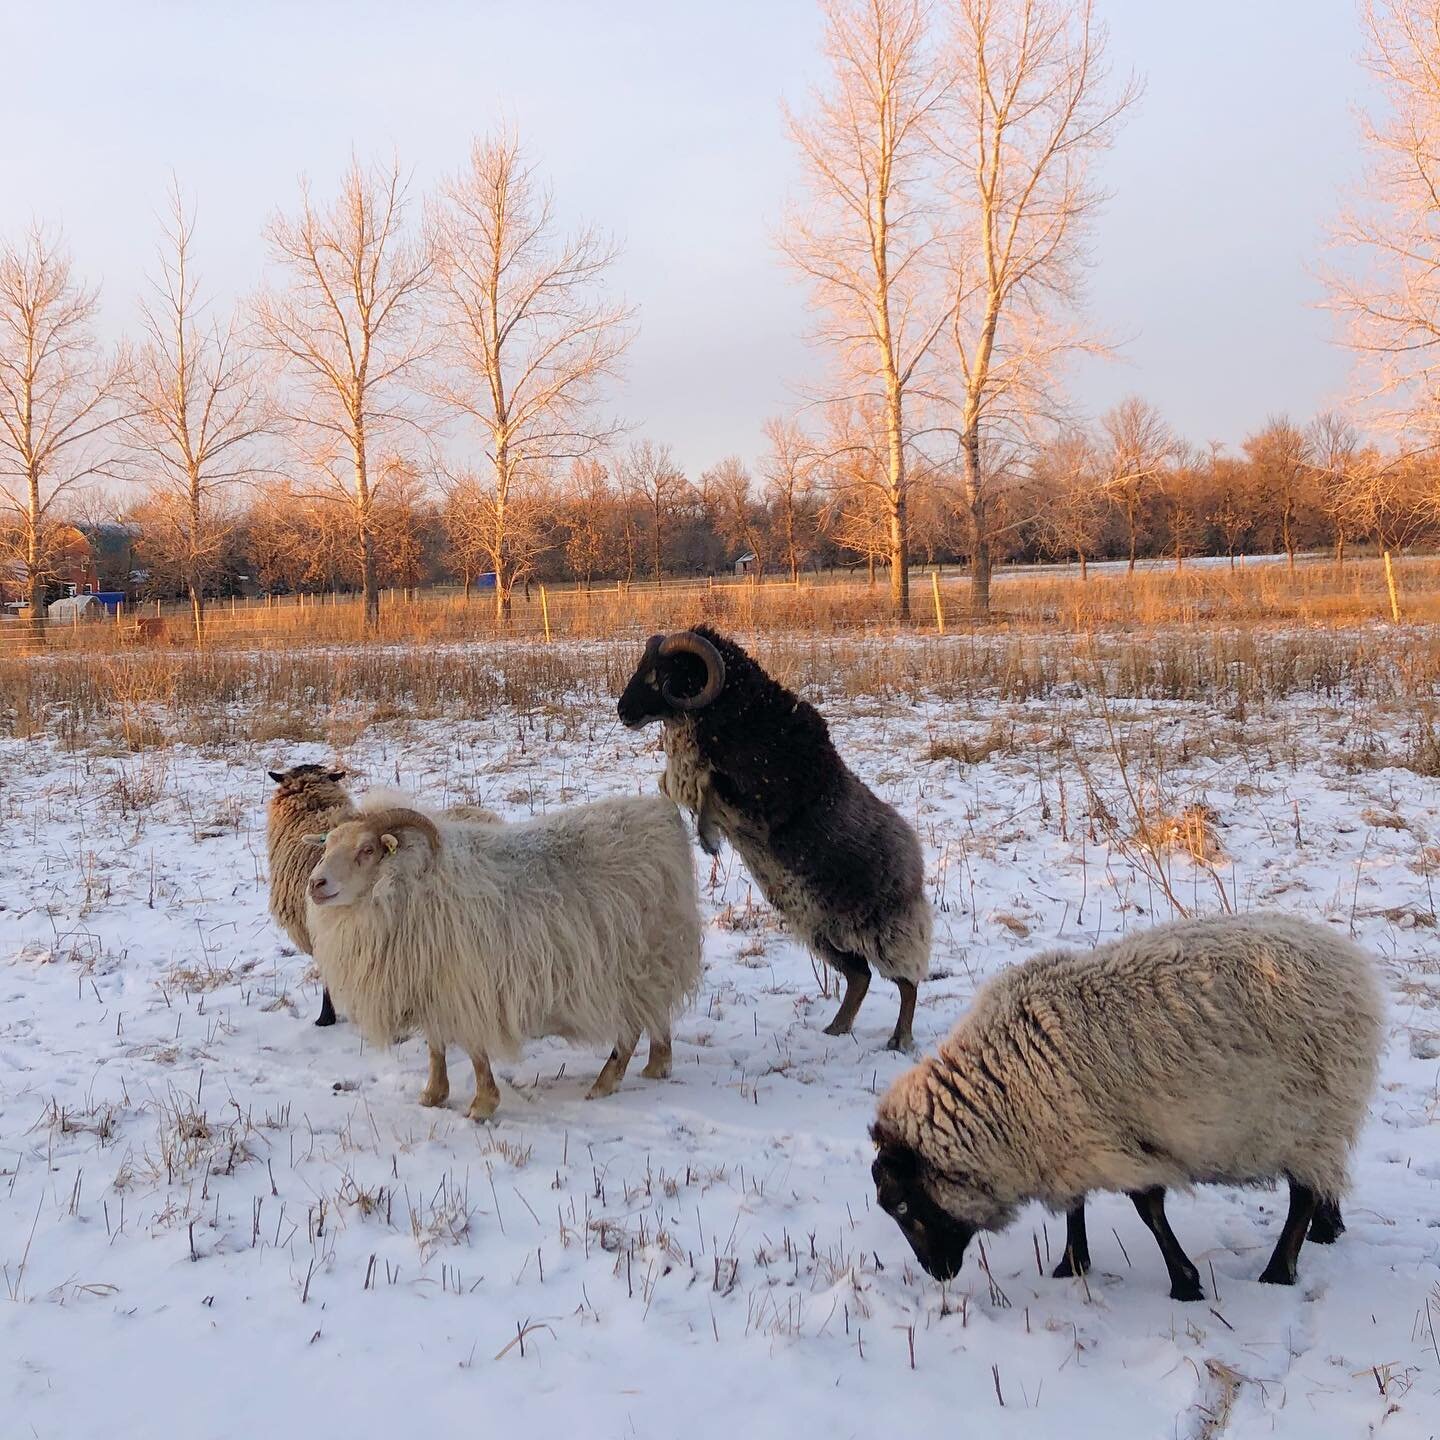 Welcome winter and breeding season! We separated the breeding ewes from the lambs and goats and put them with their boyf and Ian. They are enjoying the new pasture and, uh, the attention.